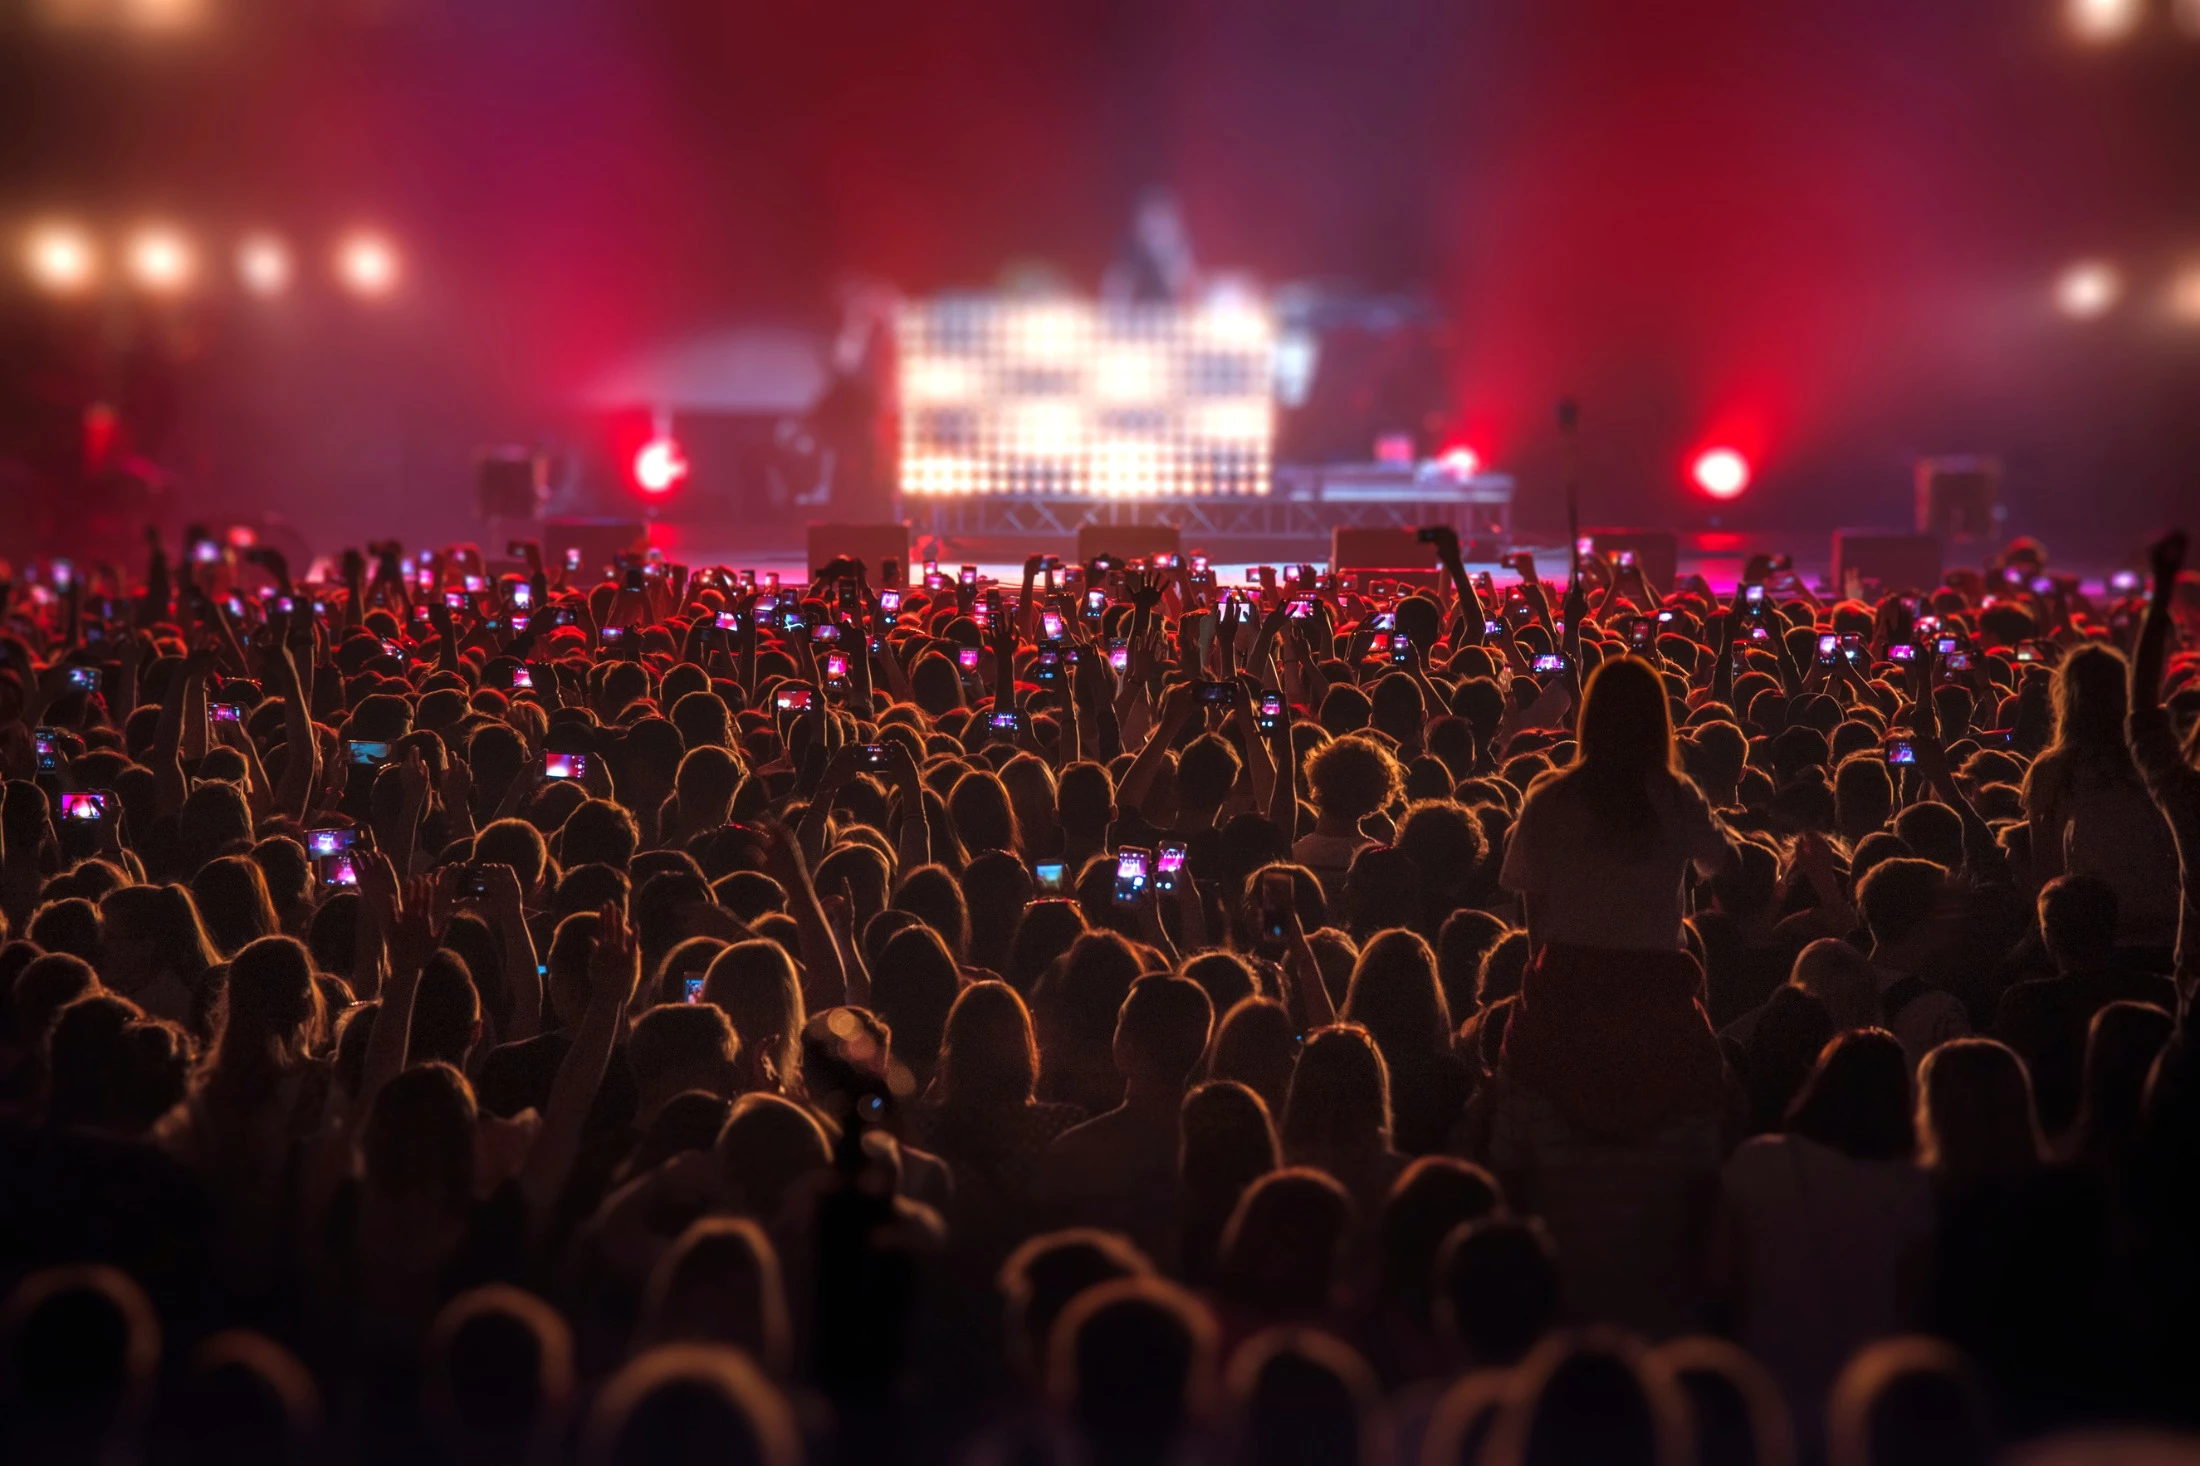 A crowd of people with their hands in the air or filming with their phones at a concert.